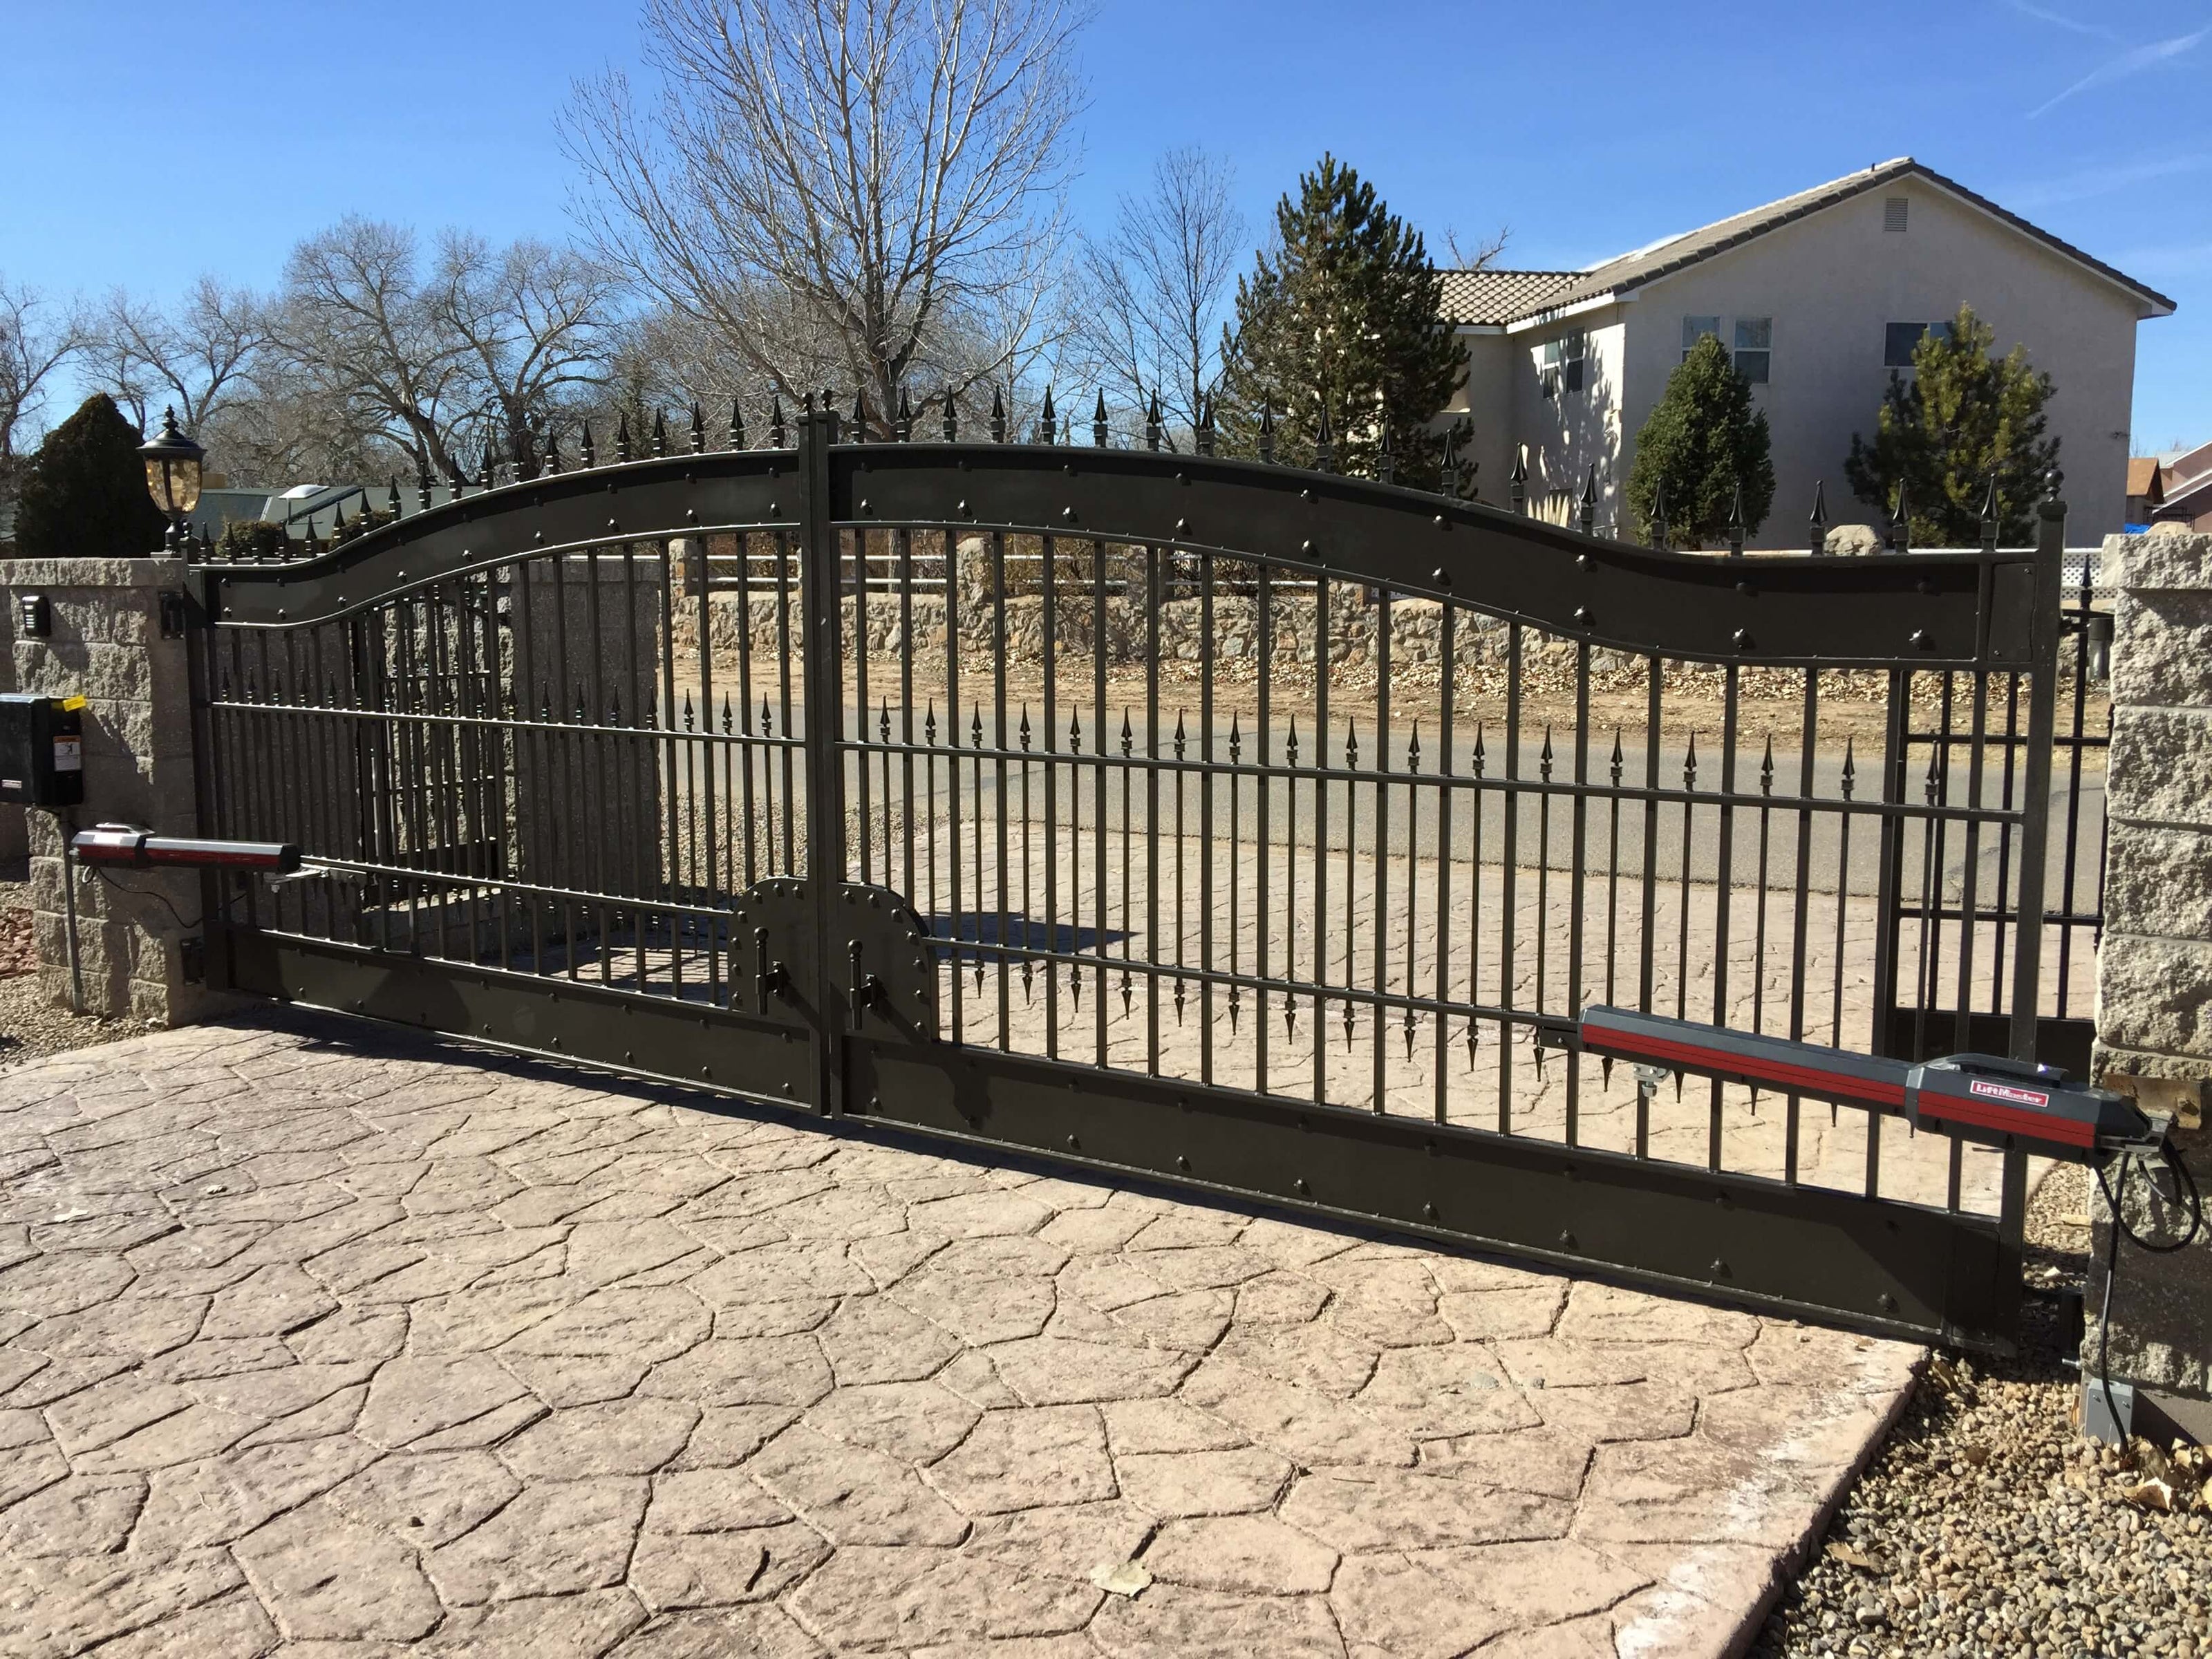 wide bronze color double wrought iron gate with heavy solid bands top and botton. Arched with rivets on bands. Gate is on flagstone driveway mounted between two square stone pillars.